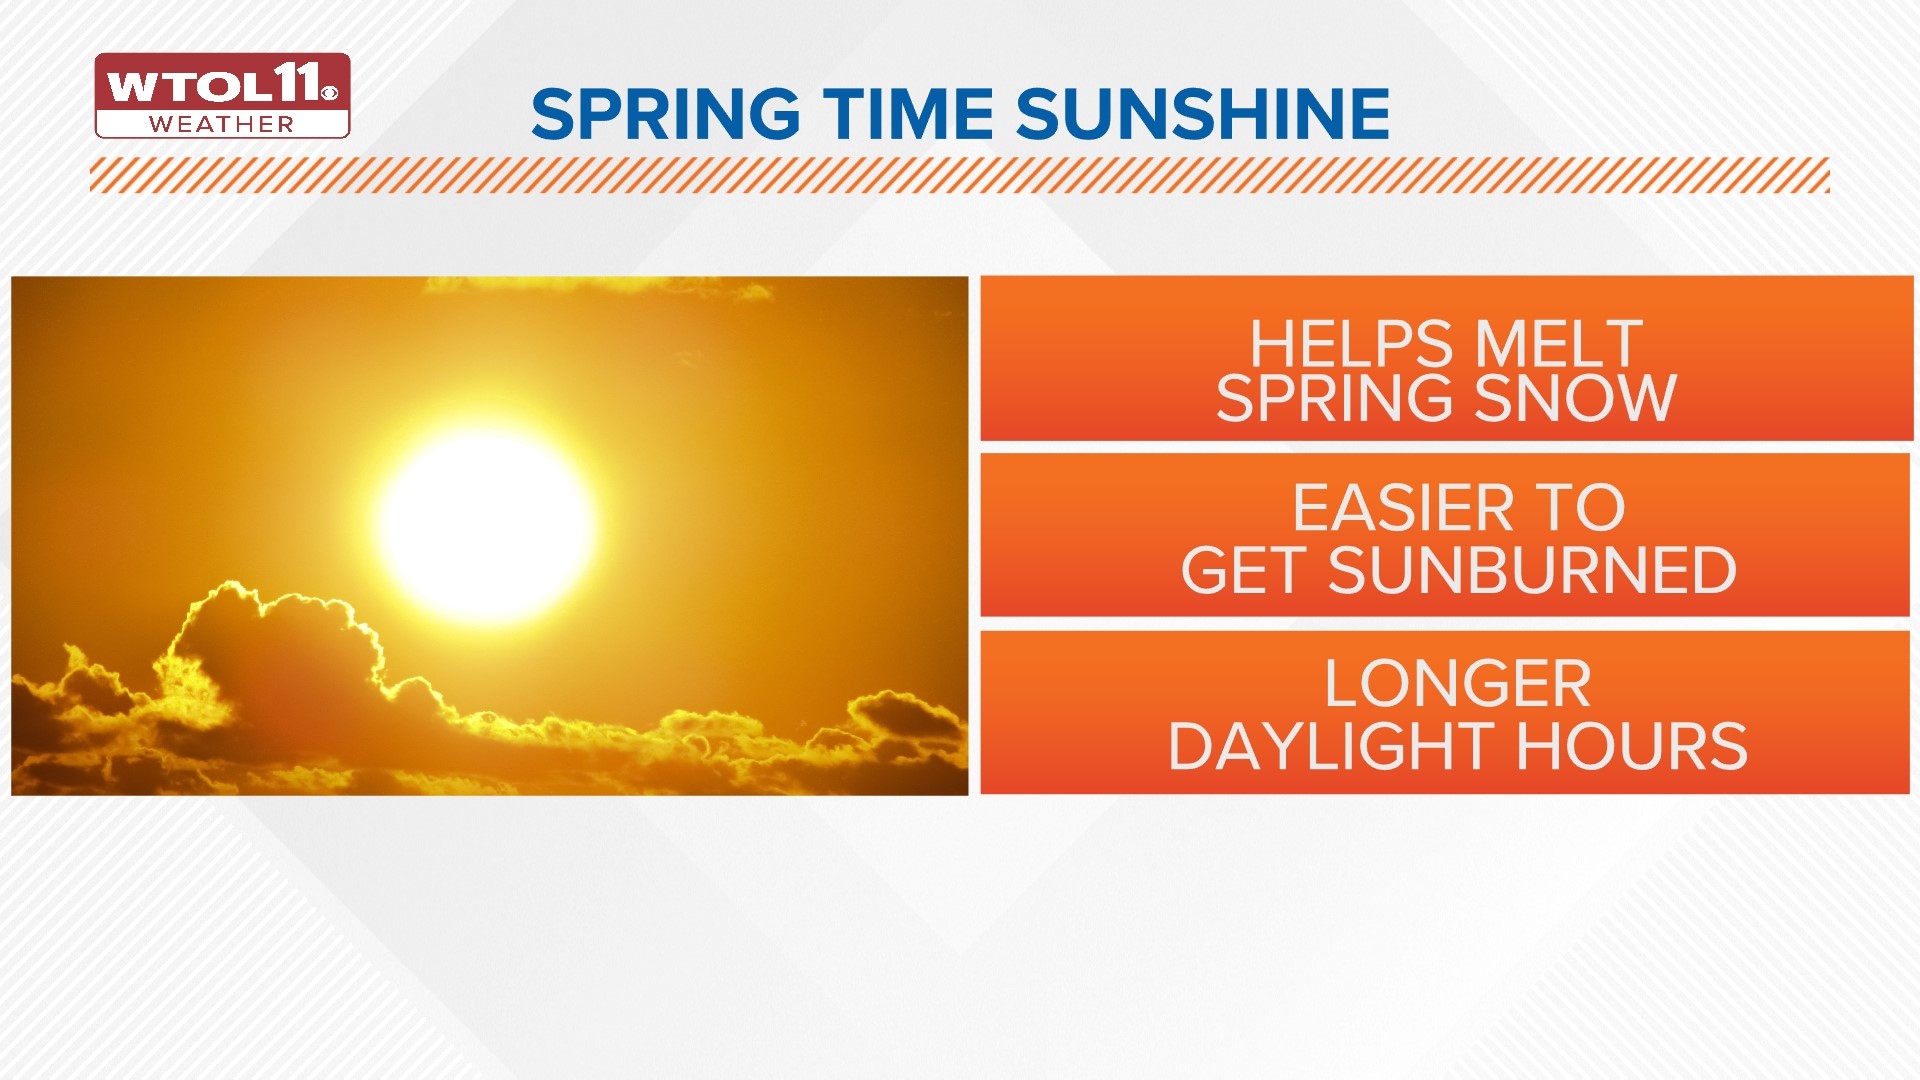 As the season gets warmer, the sun angle becomes stronger which will impact your daily life.